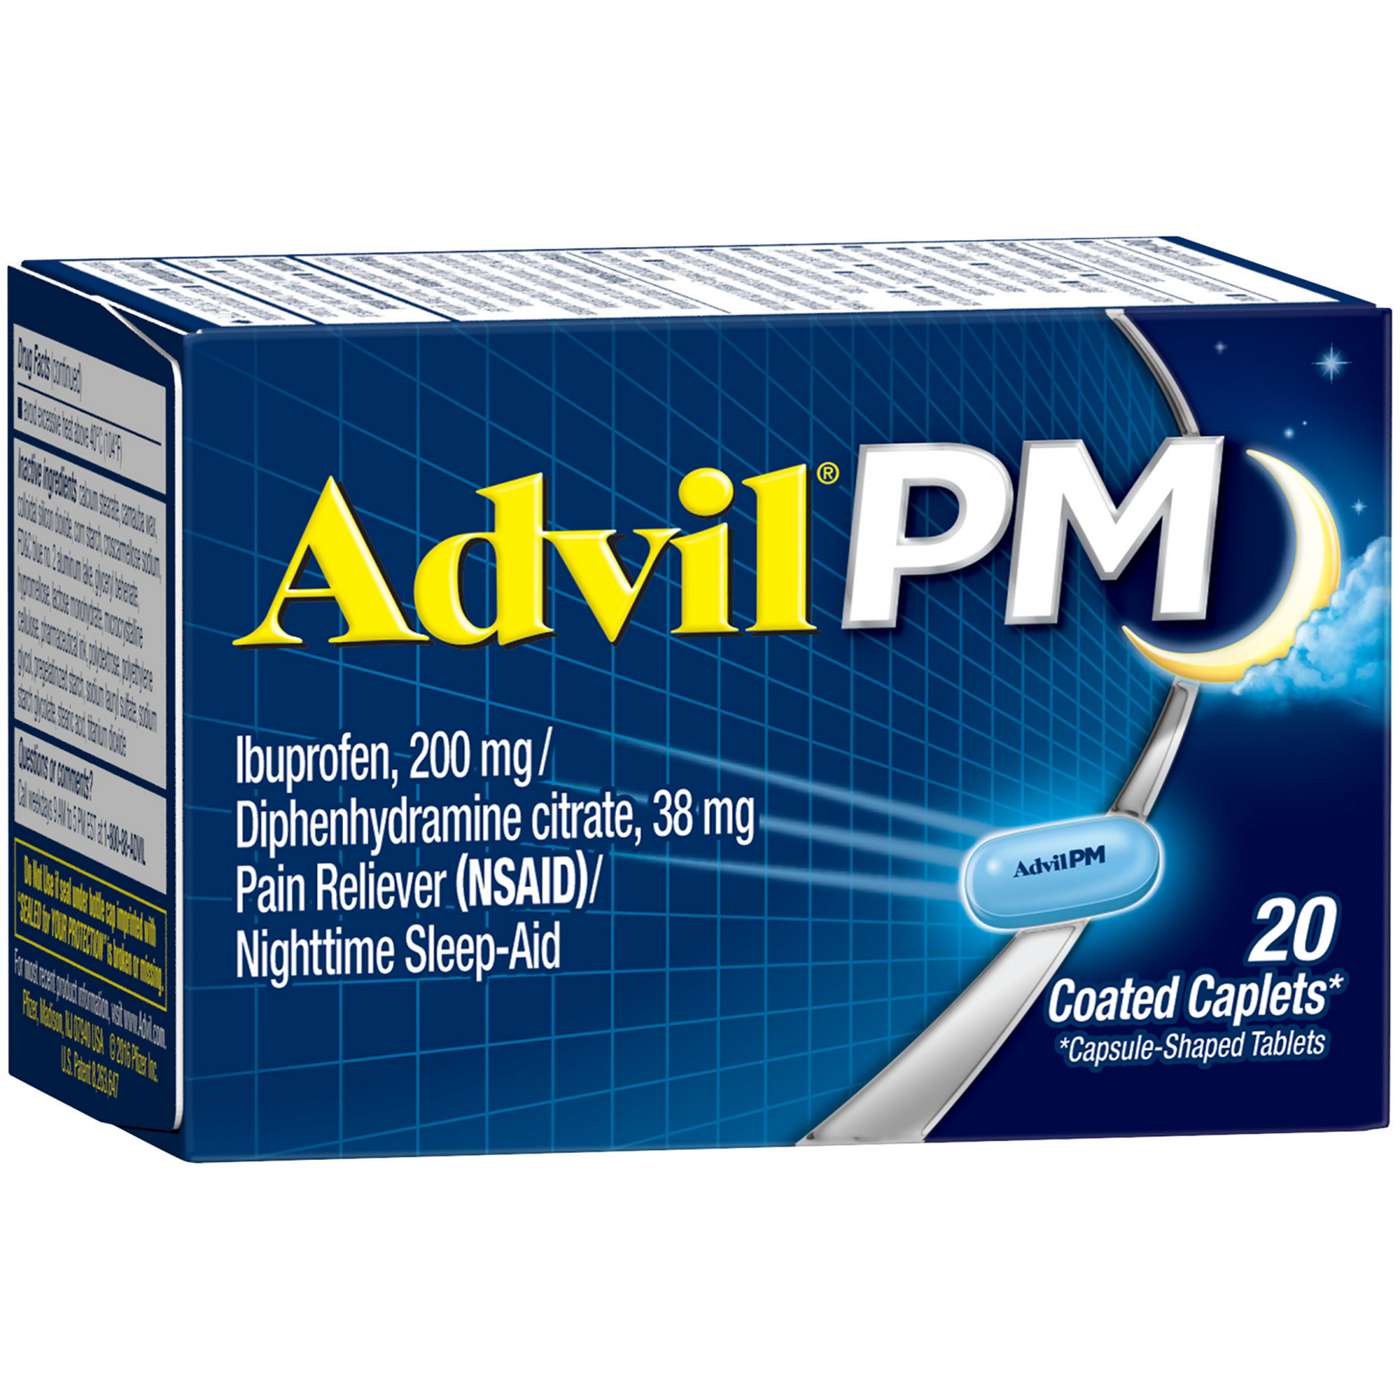 Advil PM Pain Reliever & Nighttime Sleep Aid Coated Caplets; image 1 of 8